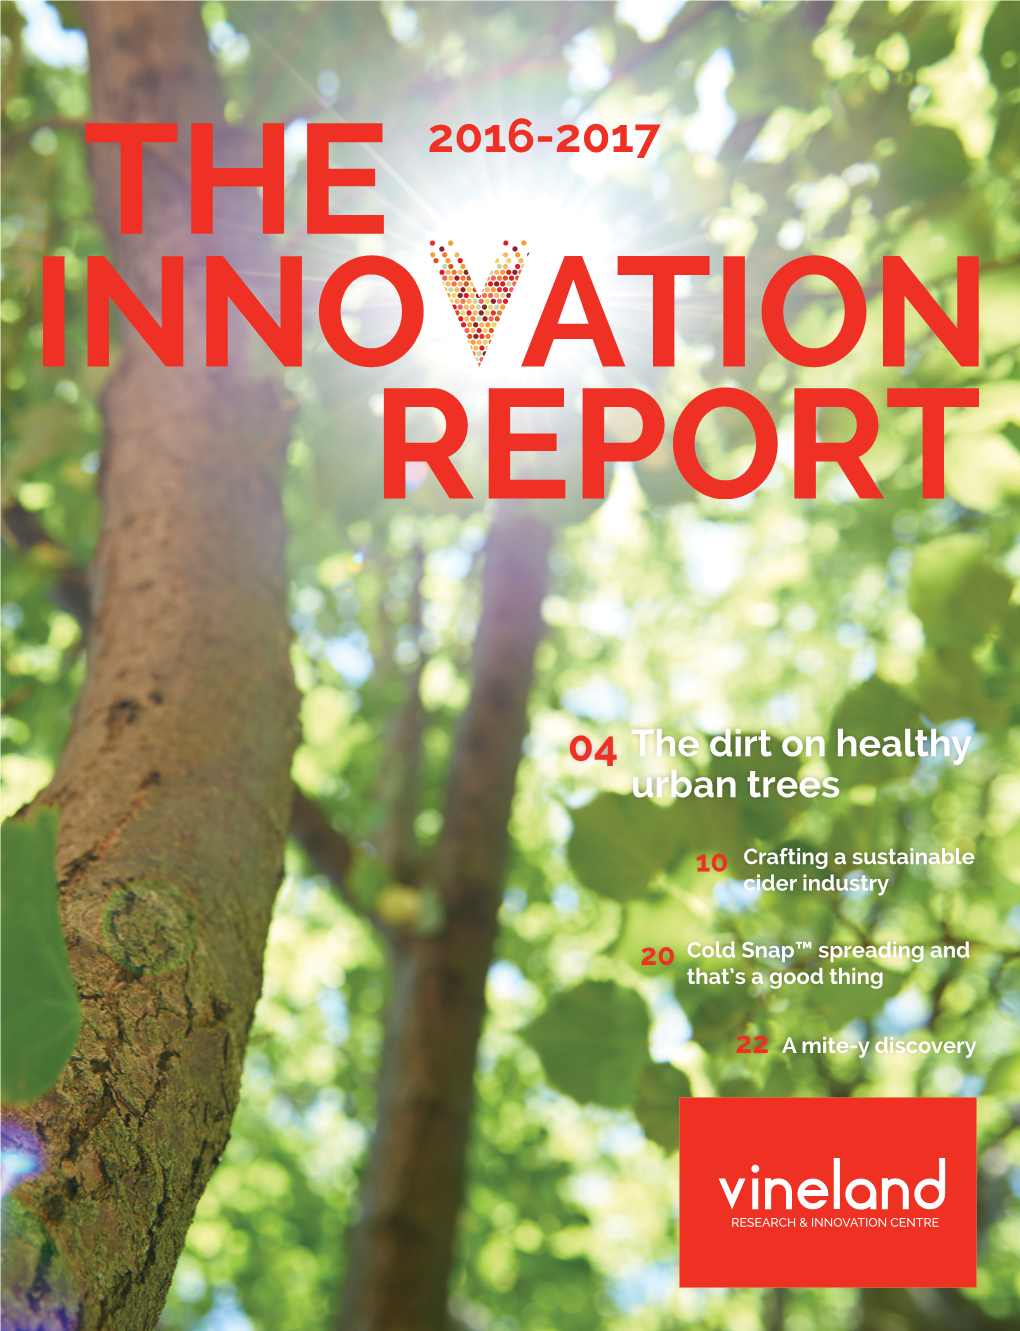 The 2016-2017 Innovation Report